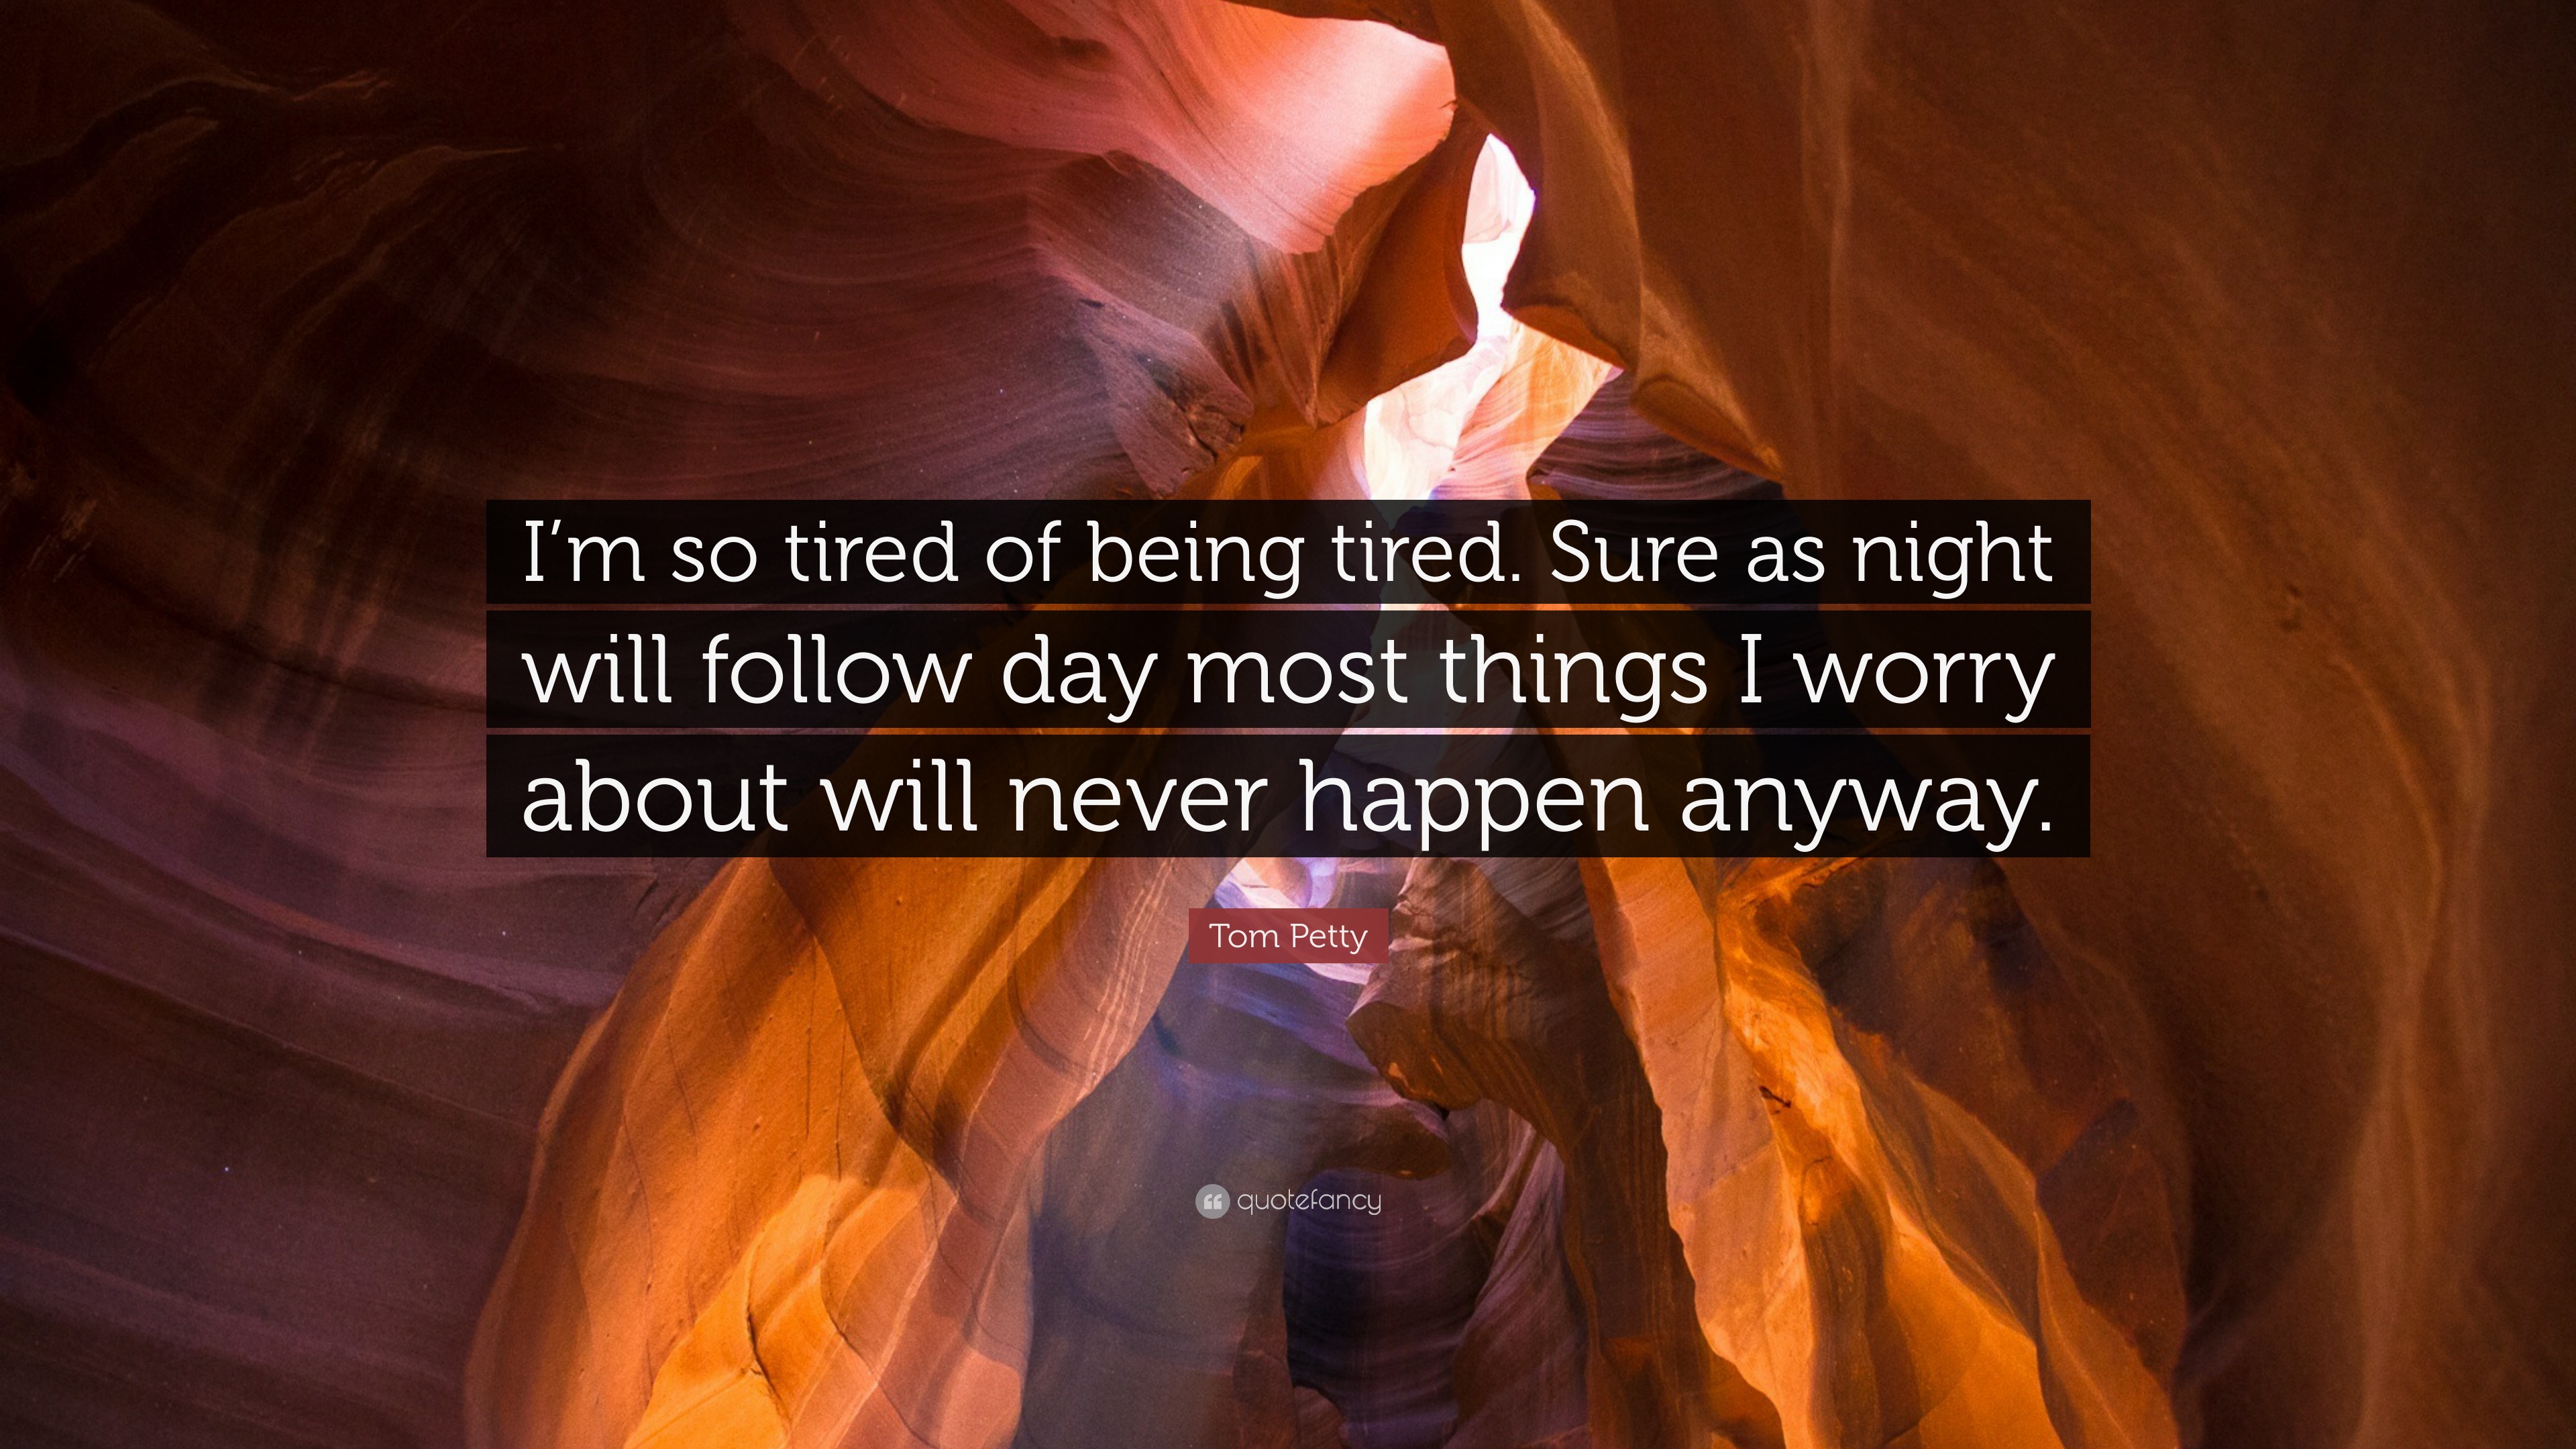 Tom Petty Quote: “I’m so tired of being tired. Sure as night will